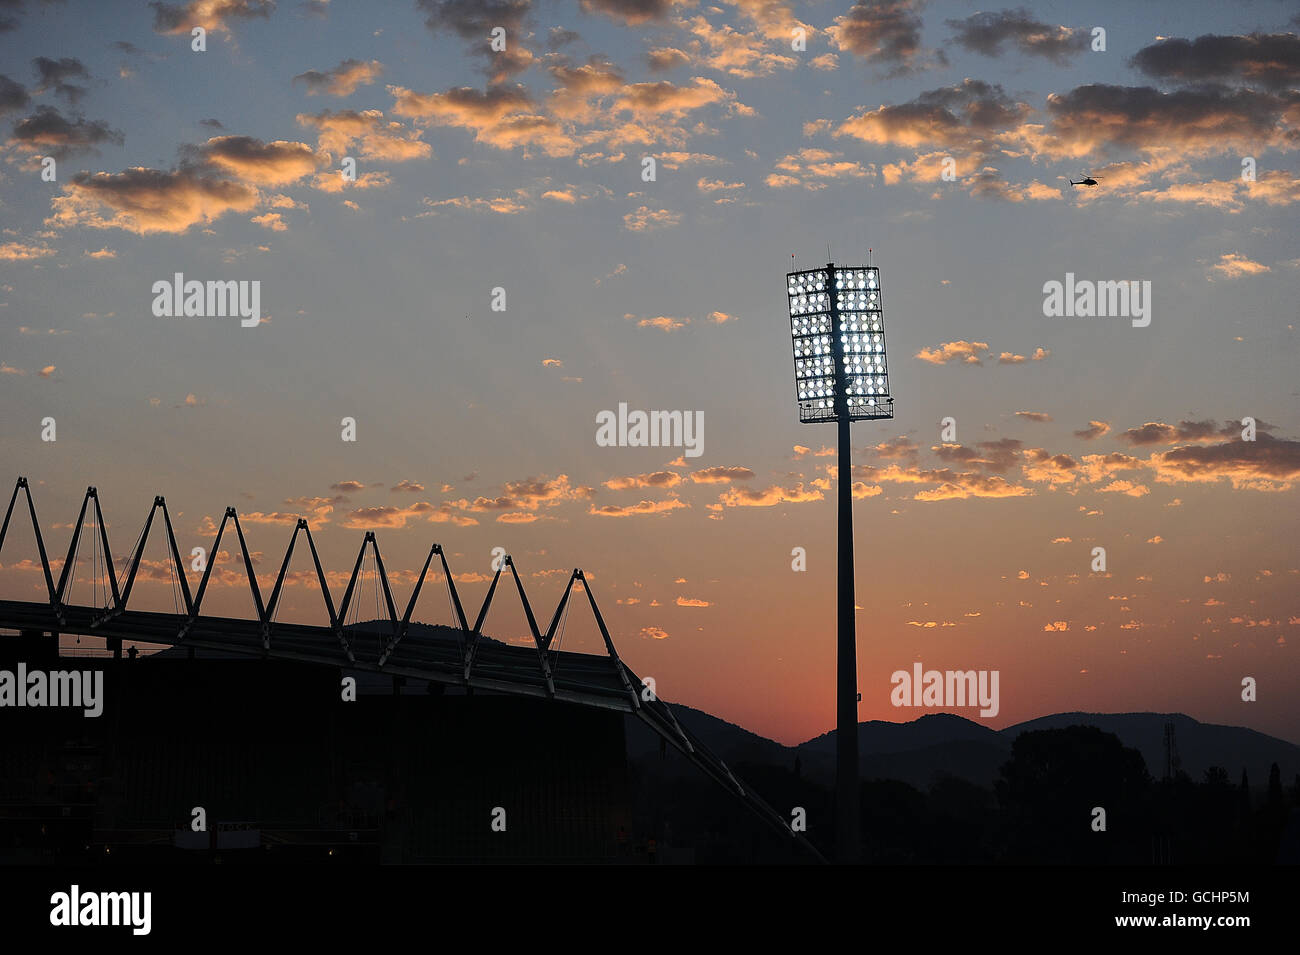 Soccer - 2010 FIFA World Cup South Africa - Group C - England v USA - Royal Bafokeng Stadium. A view of a floodlight at the Royal Bafokeng Stadium Stock Photo